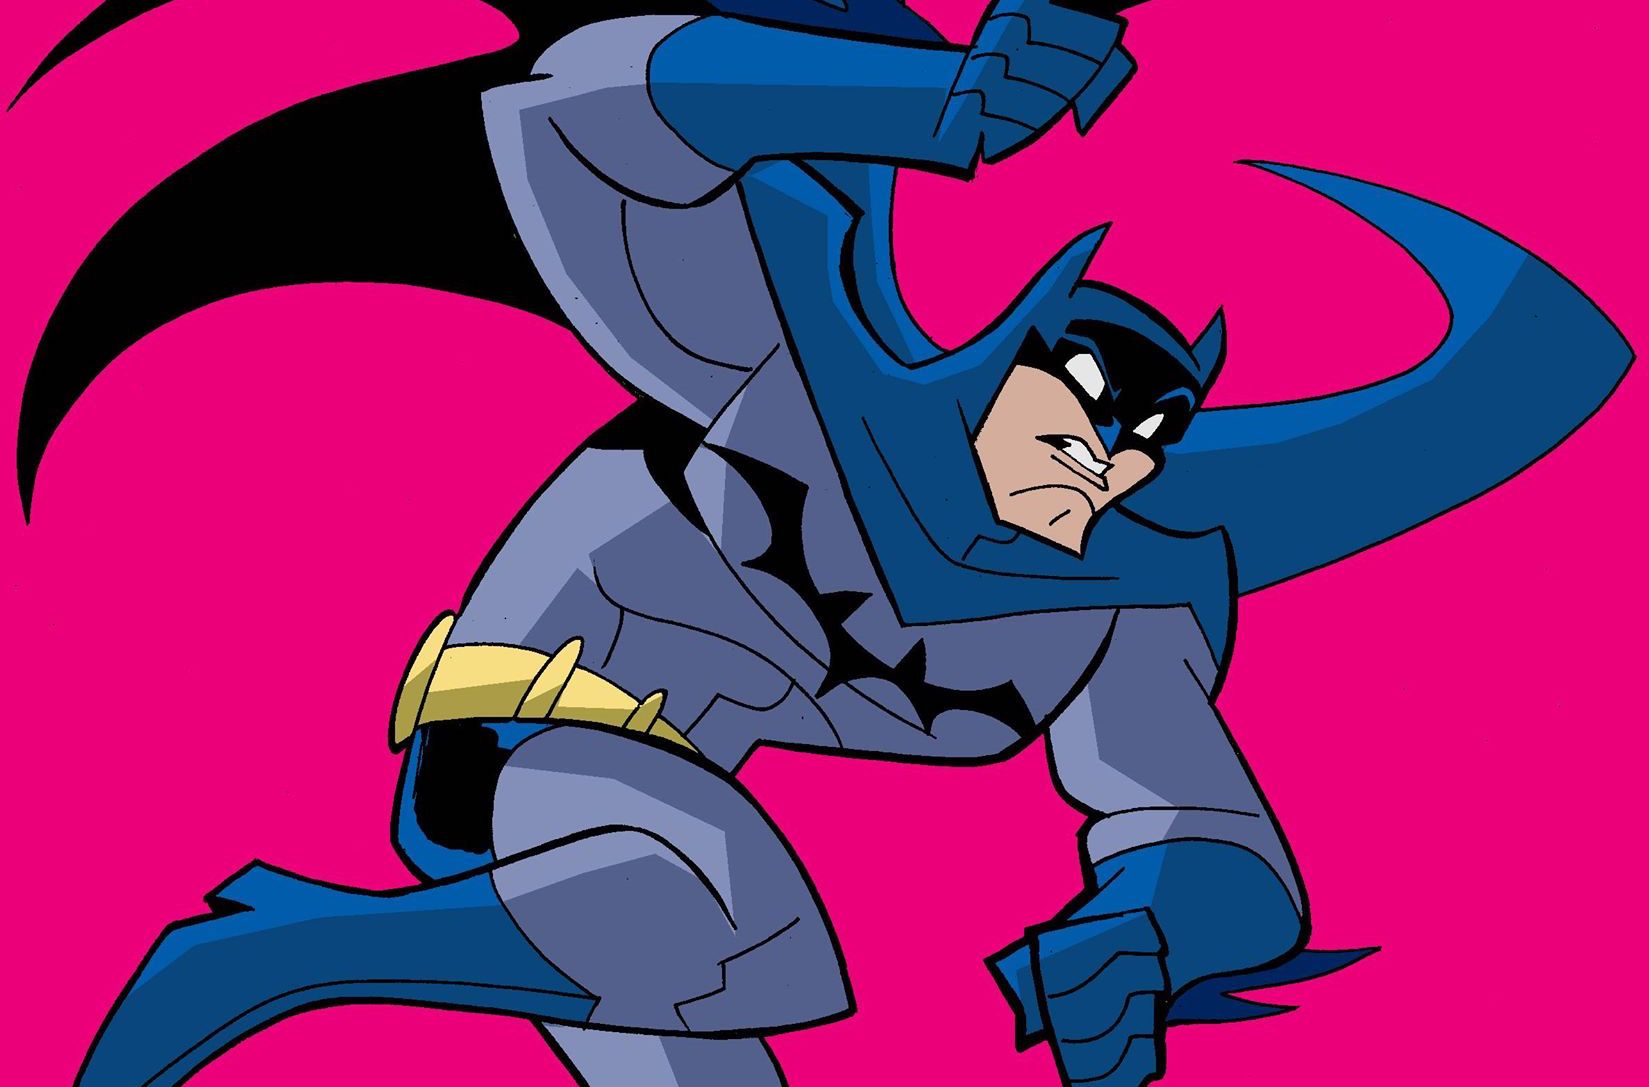 EXCLUSIVE Dig These Original BATMAN BRAVE AND THE BOLD Designs 13th